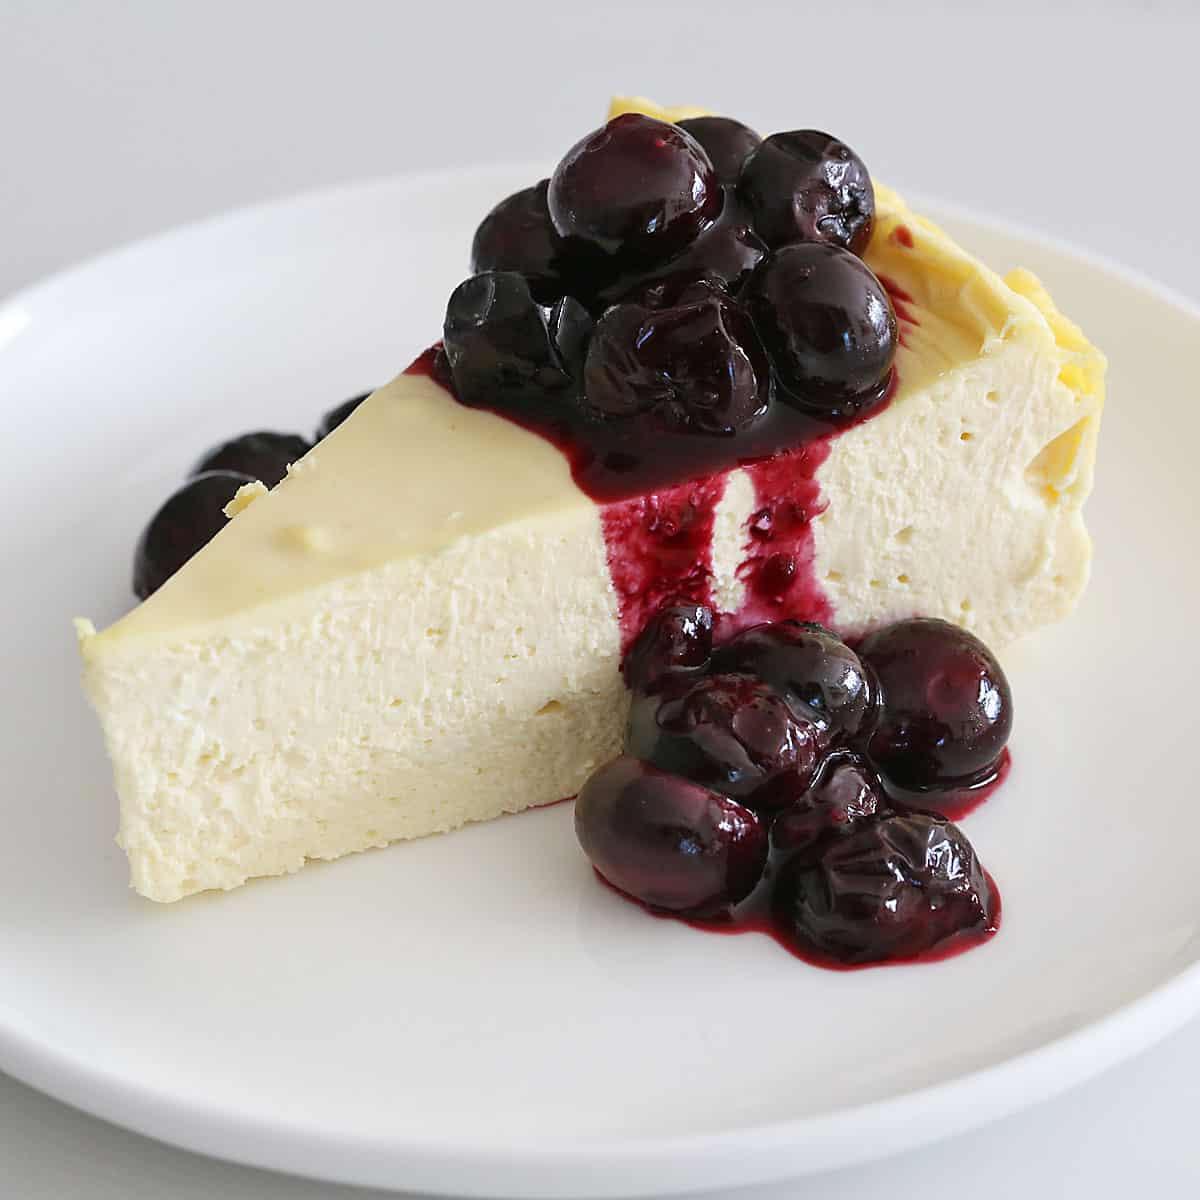 Cheesecake topped with blueberry compote.